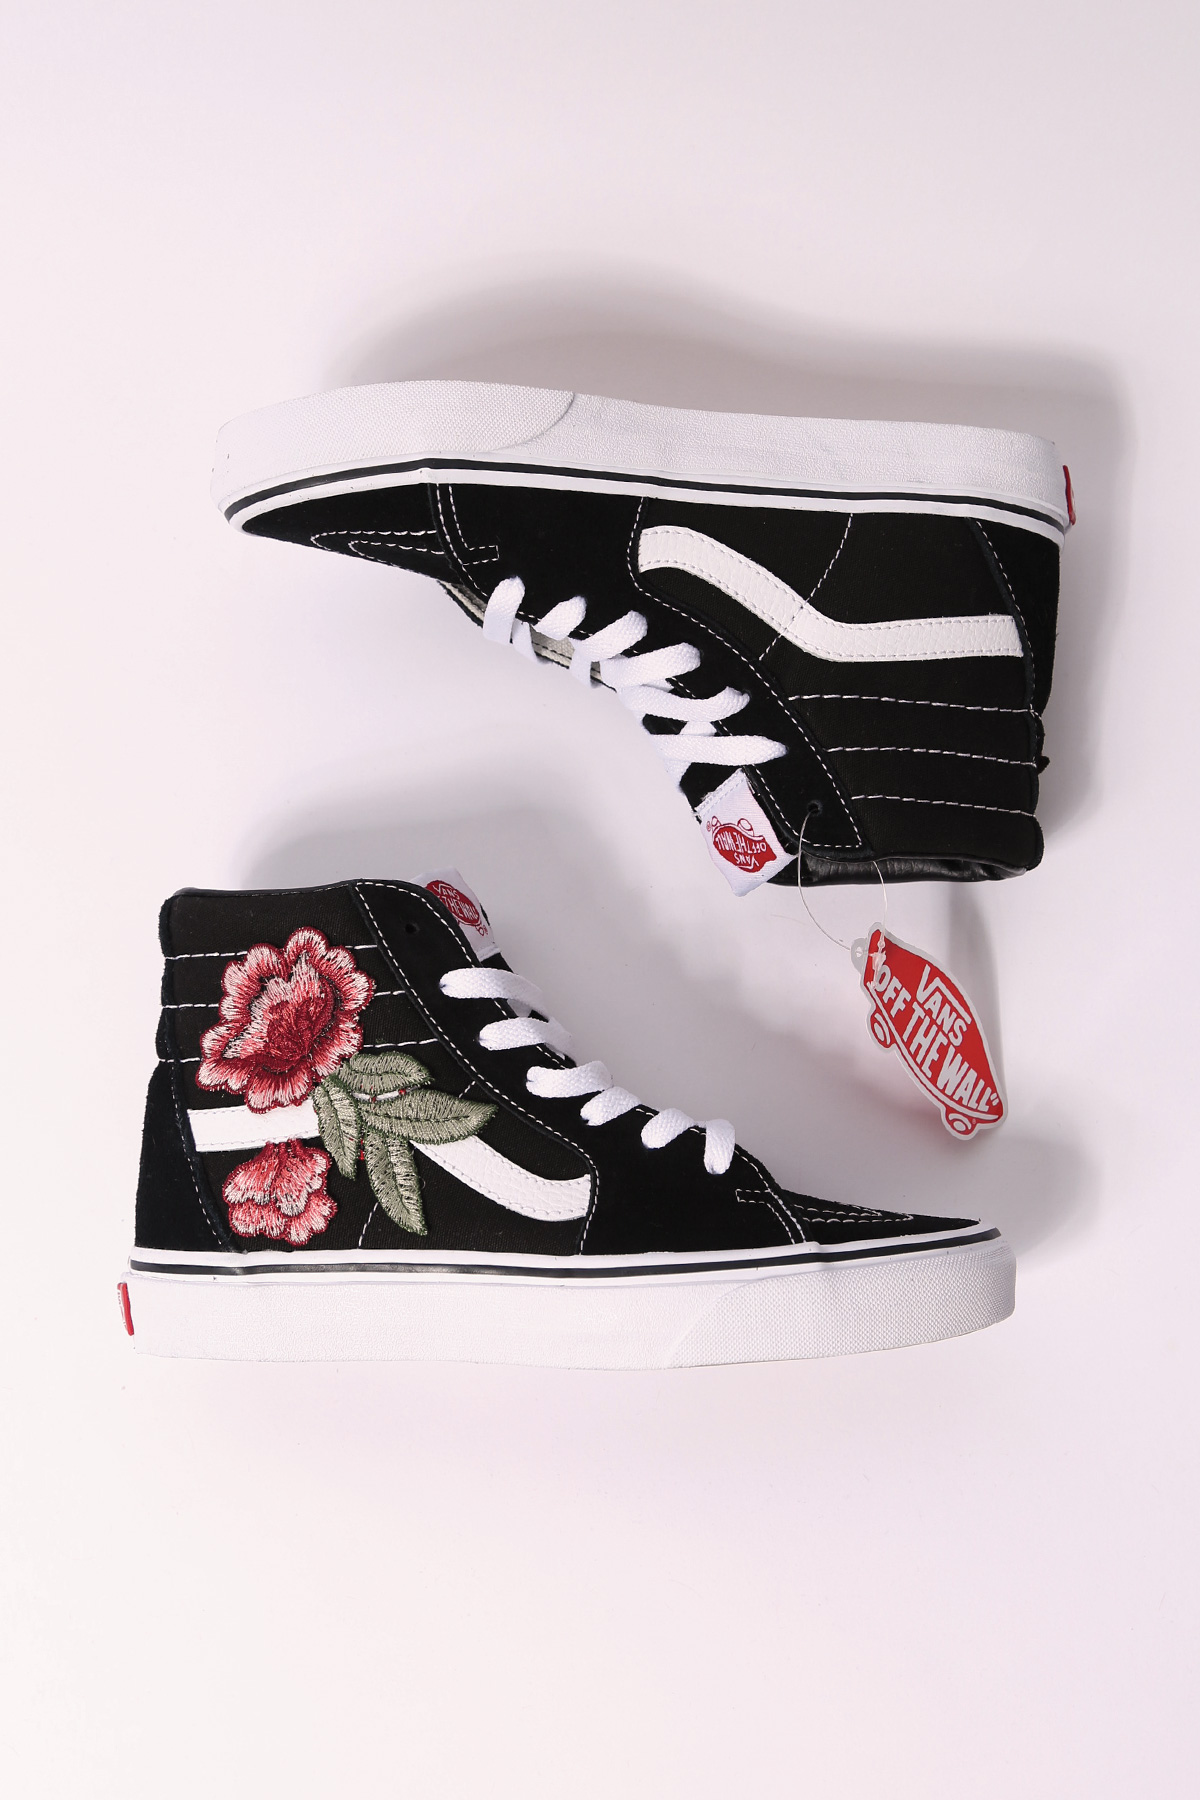 vans with roses high tops